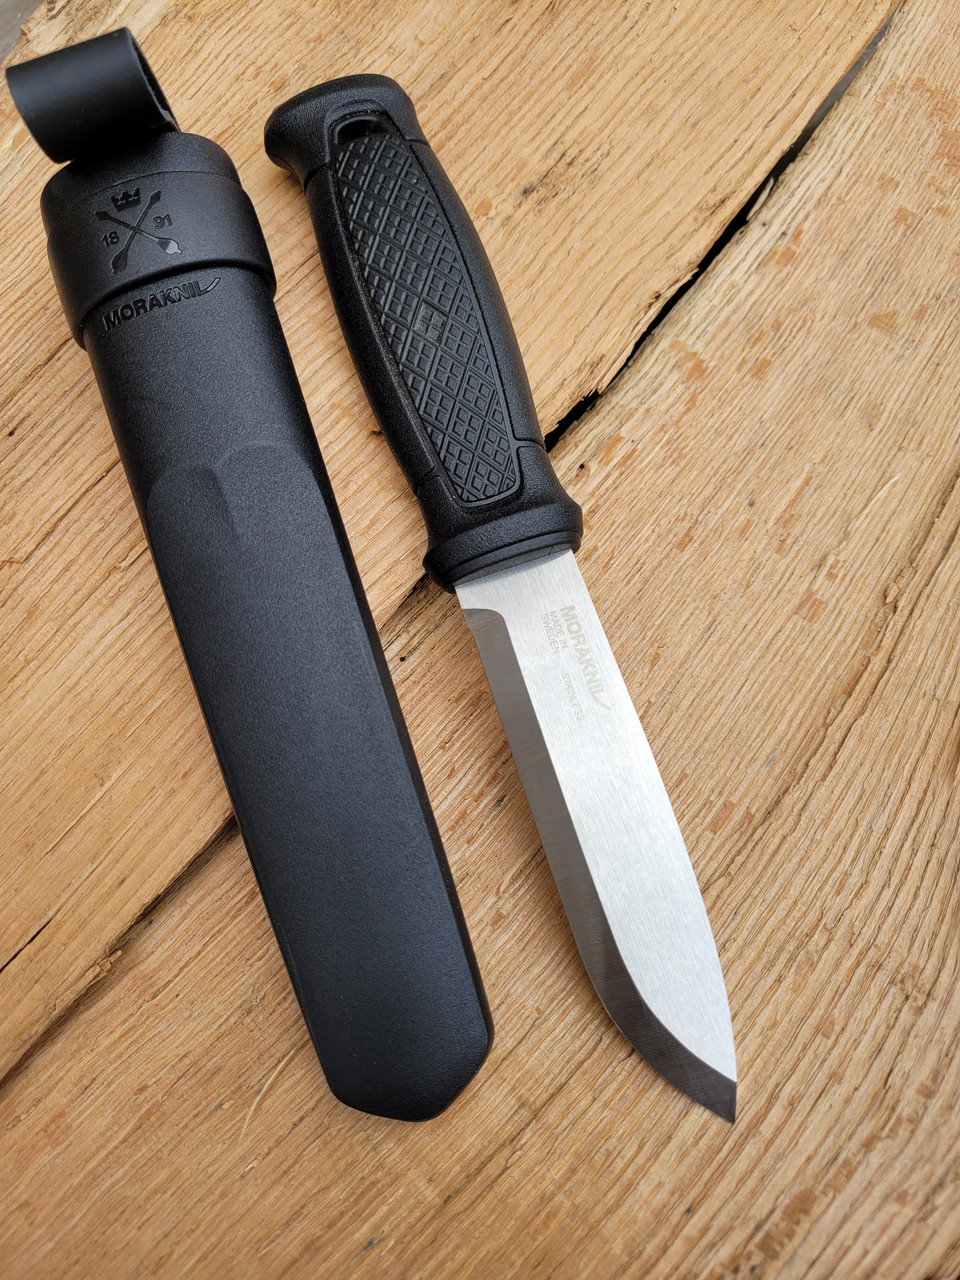 Mora Garberg Tip Modification SEND ME YOUR KNIFE - Bens Outdoor Products